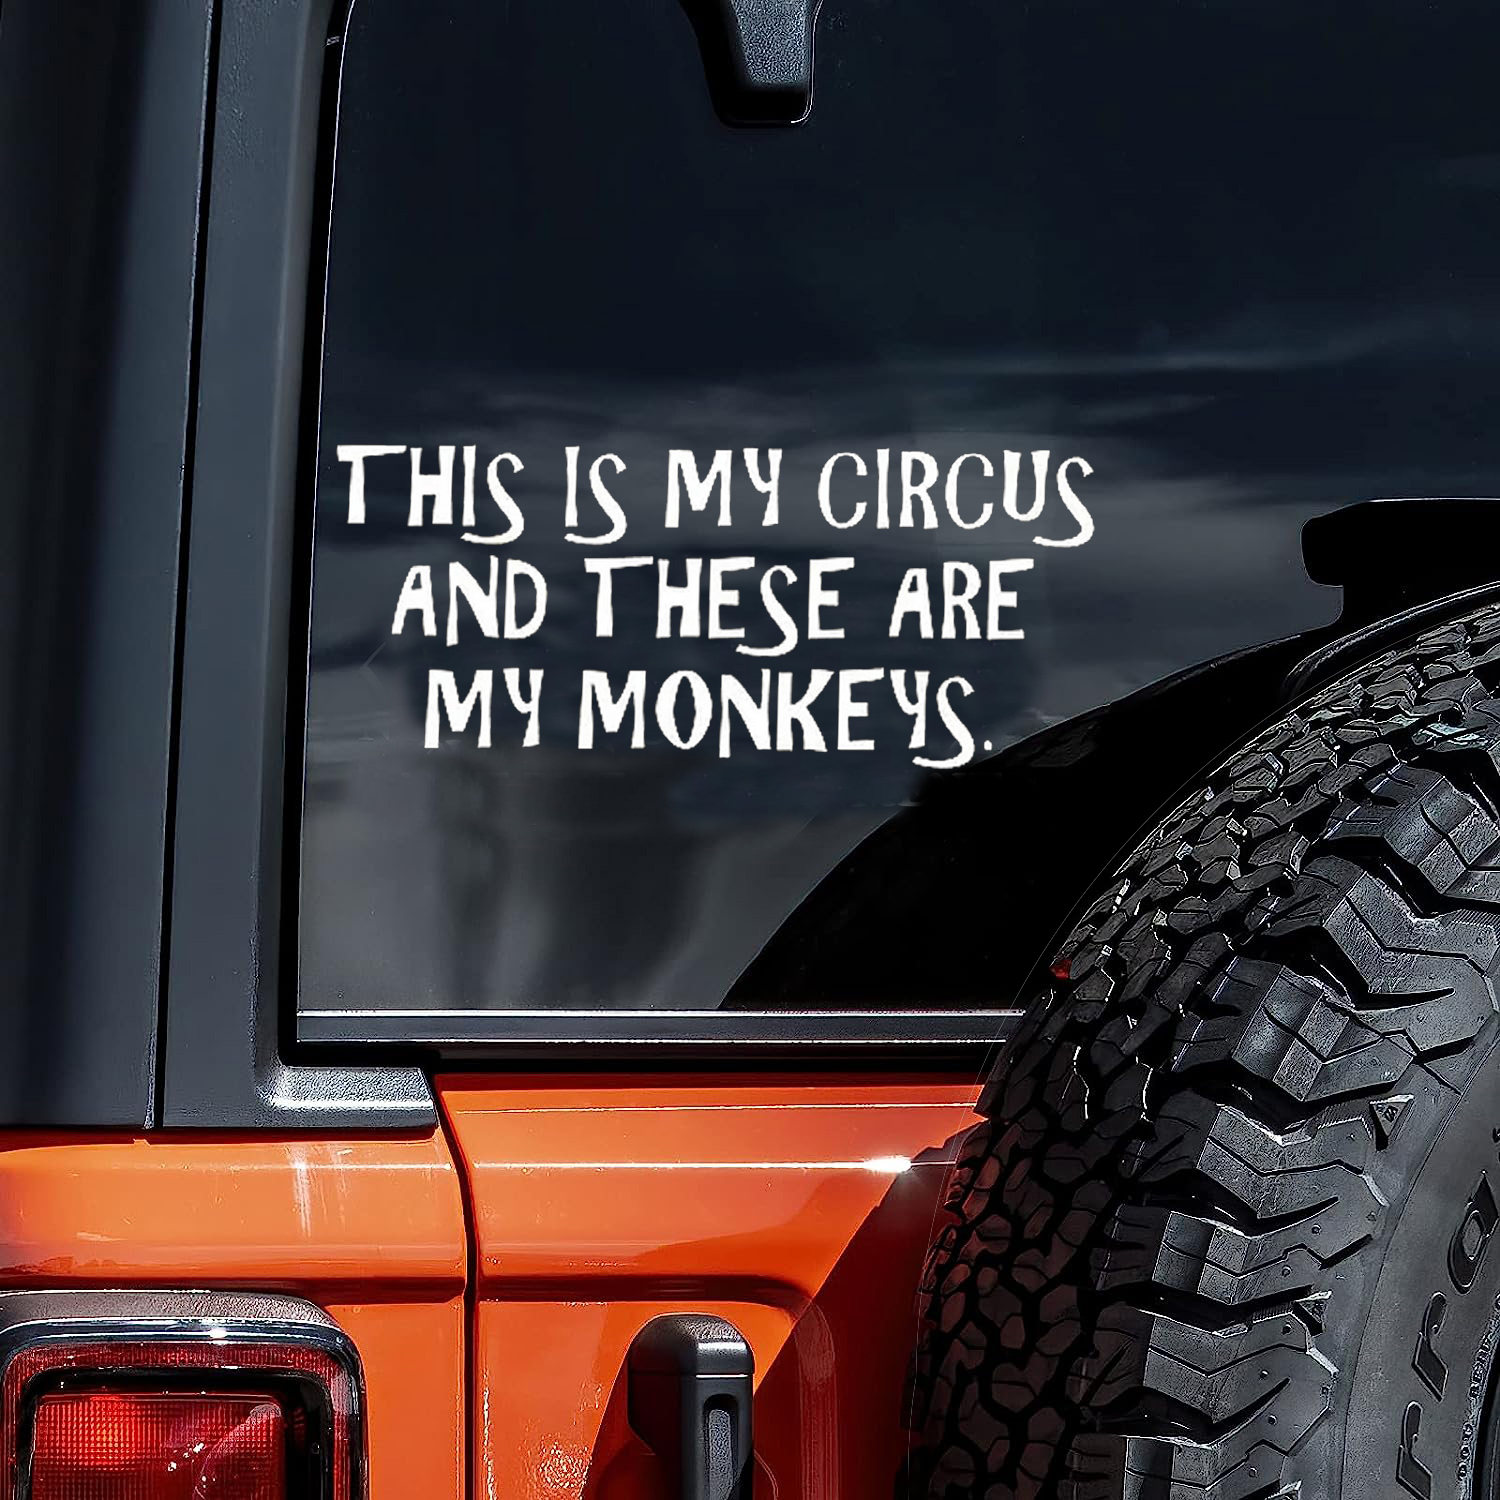 

This Is My Circus And These Are My Monkeys Car Sticker For Vehicle Paint Window Wall Cup Fishing Boat Skateboard Decals Automobile Accessories